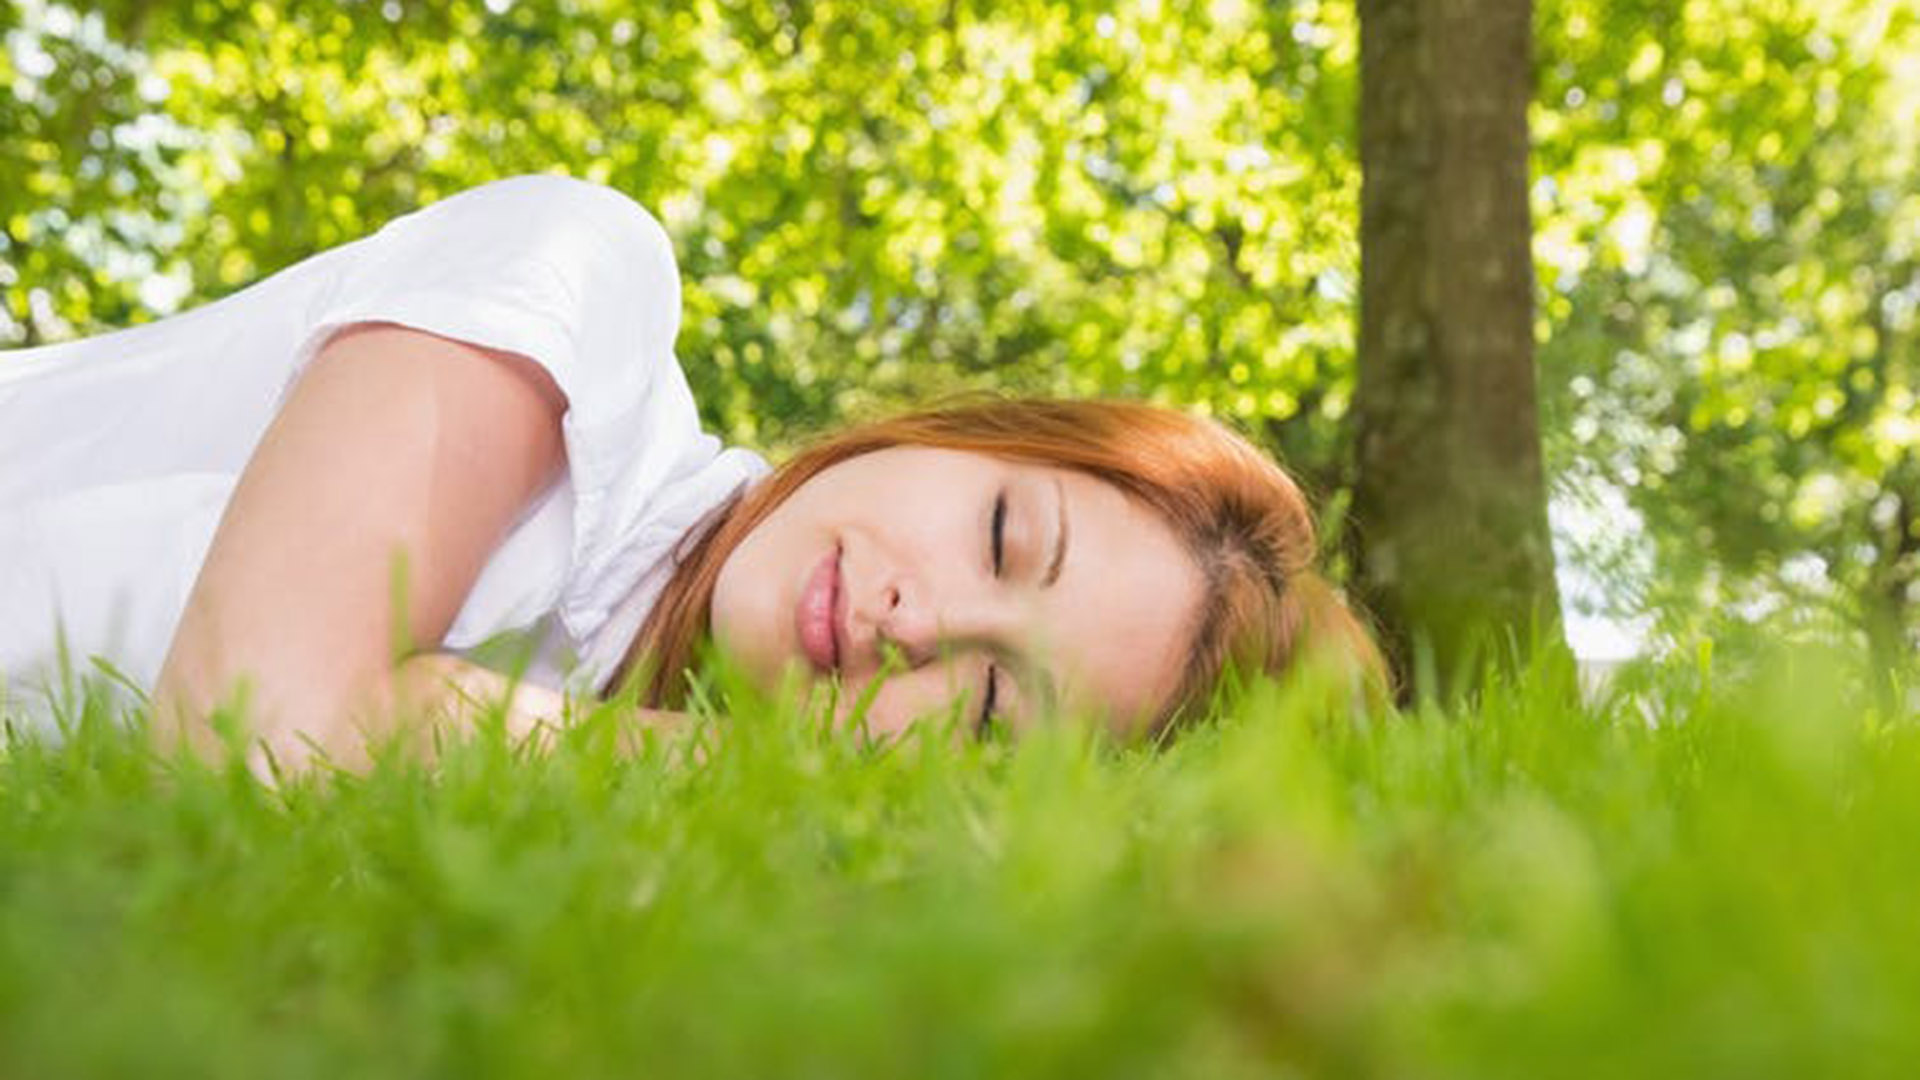 A young women sleeping on grass under a tree.